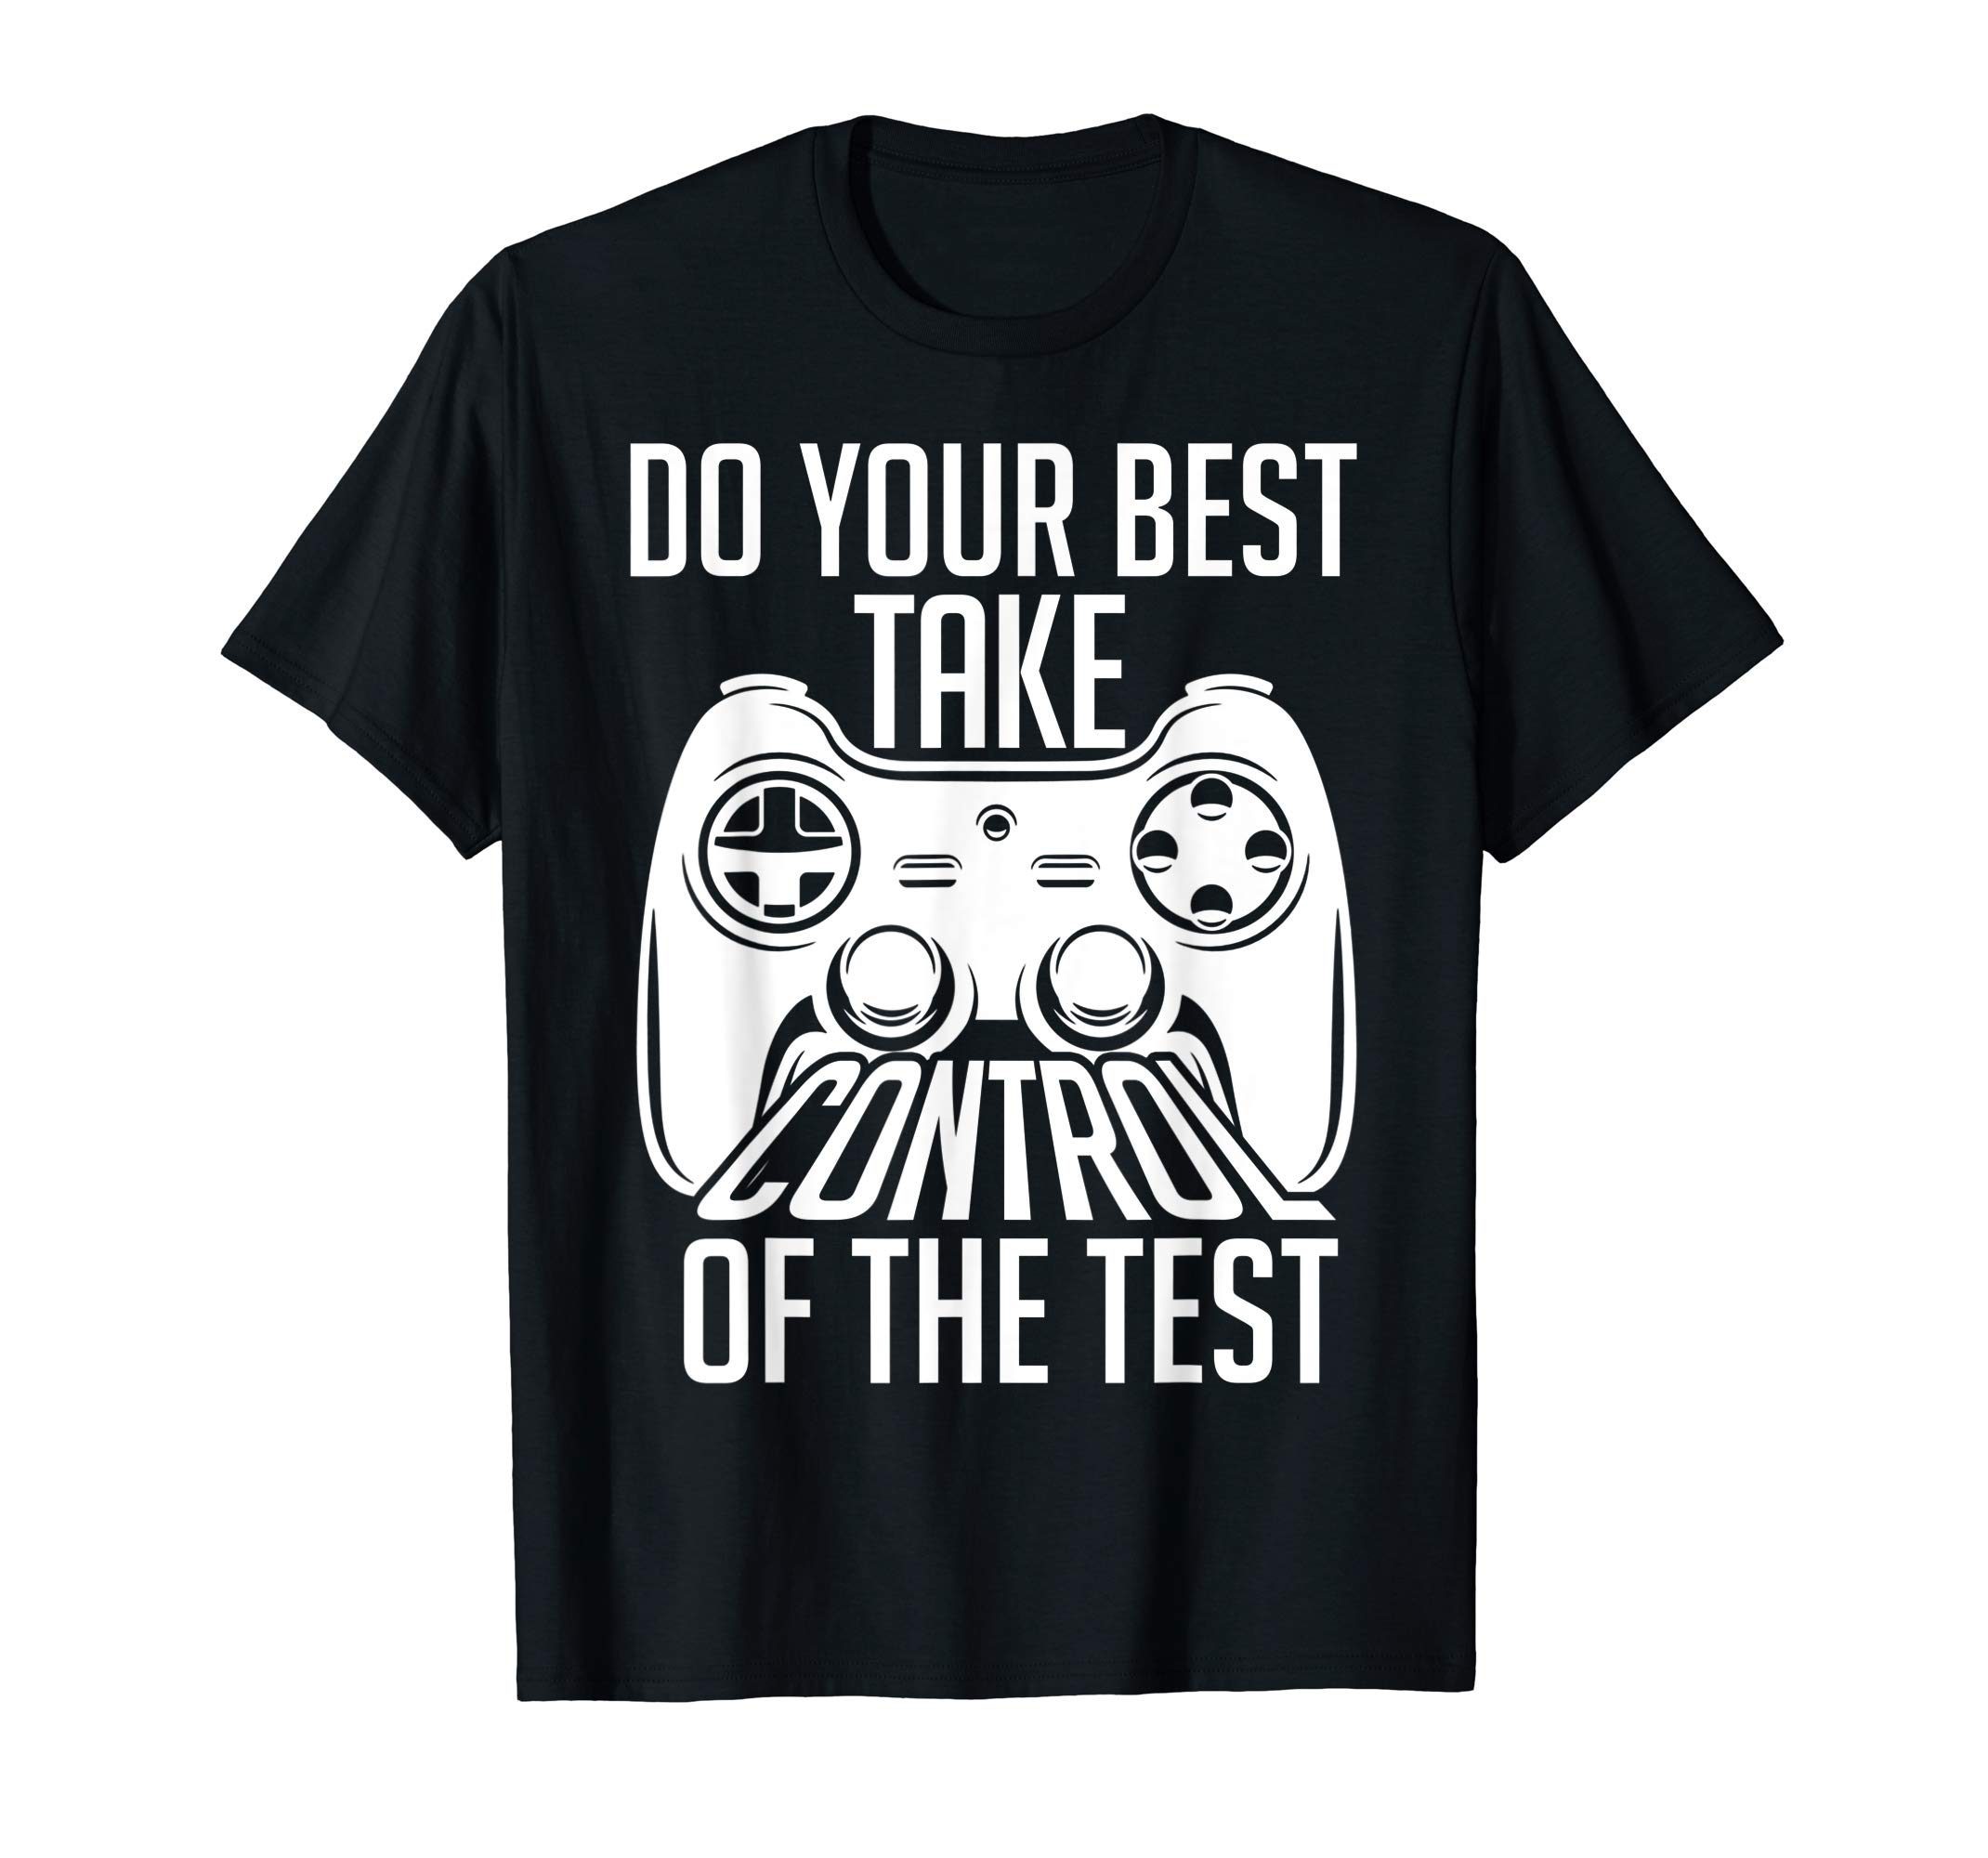 Don t try your best. Do your best. Does your. T-Shirts Test. Doing your best (Shirt).